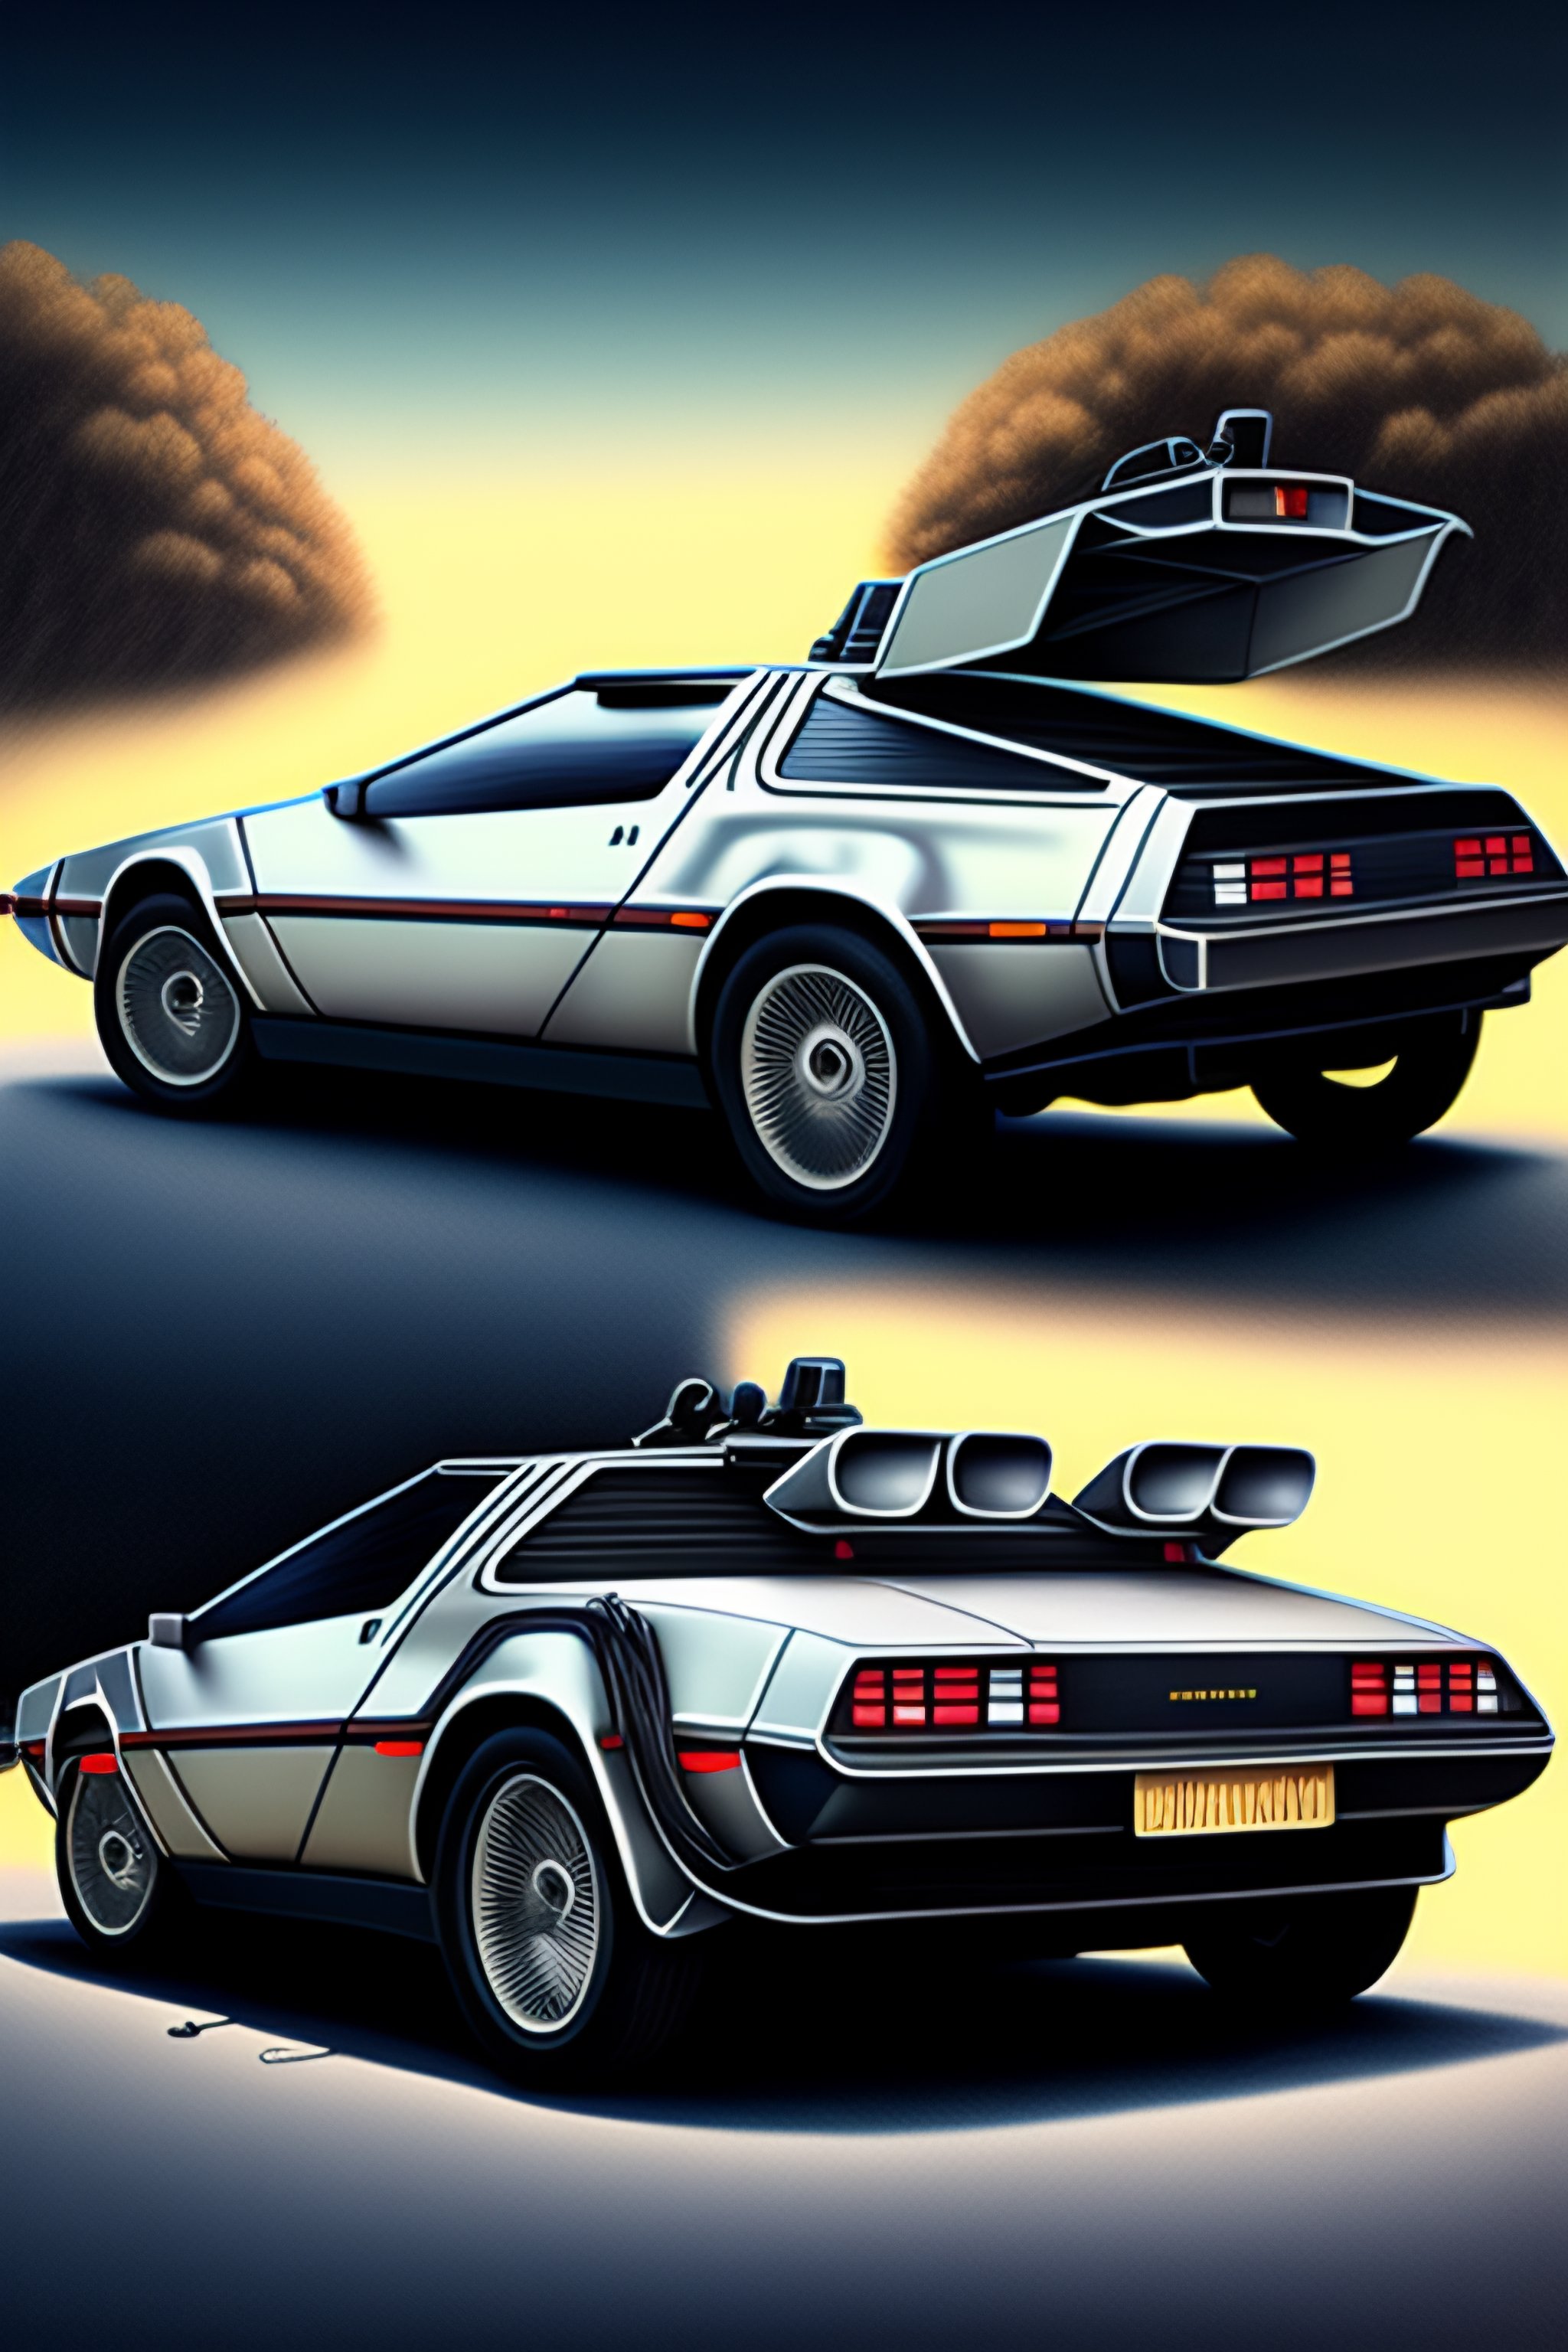 Lexica - Delorean time machine very detailed drawing